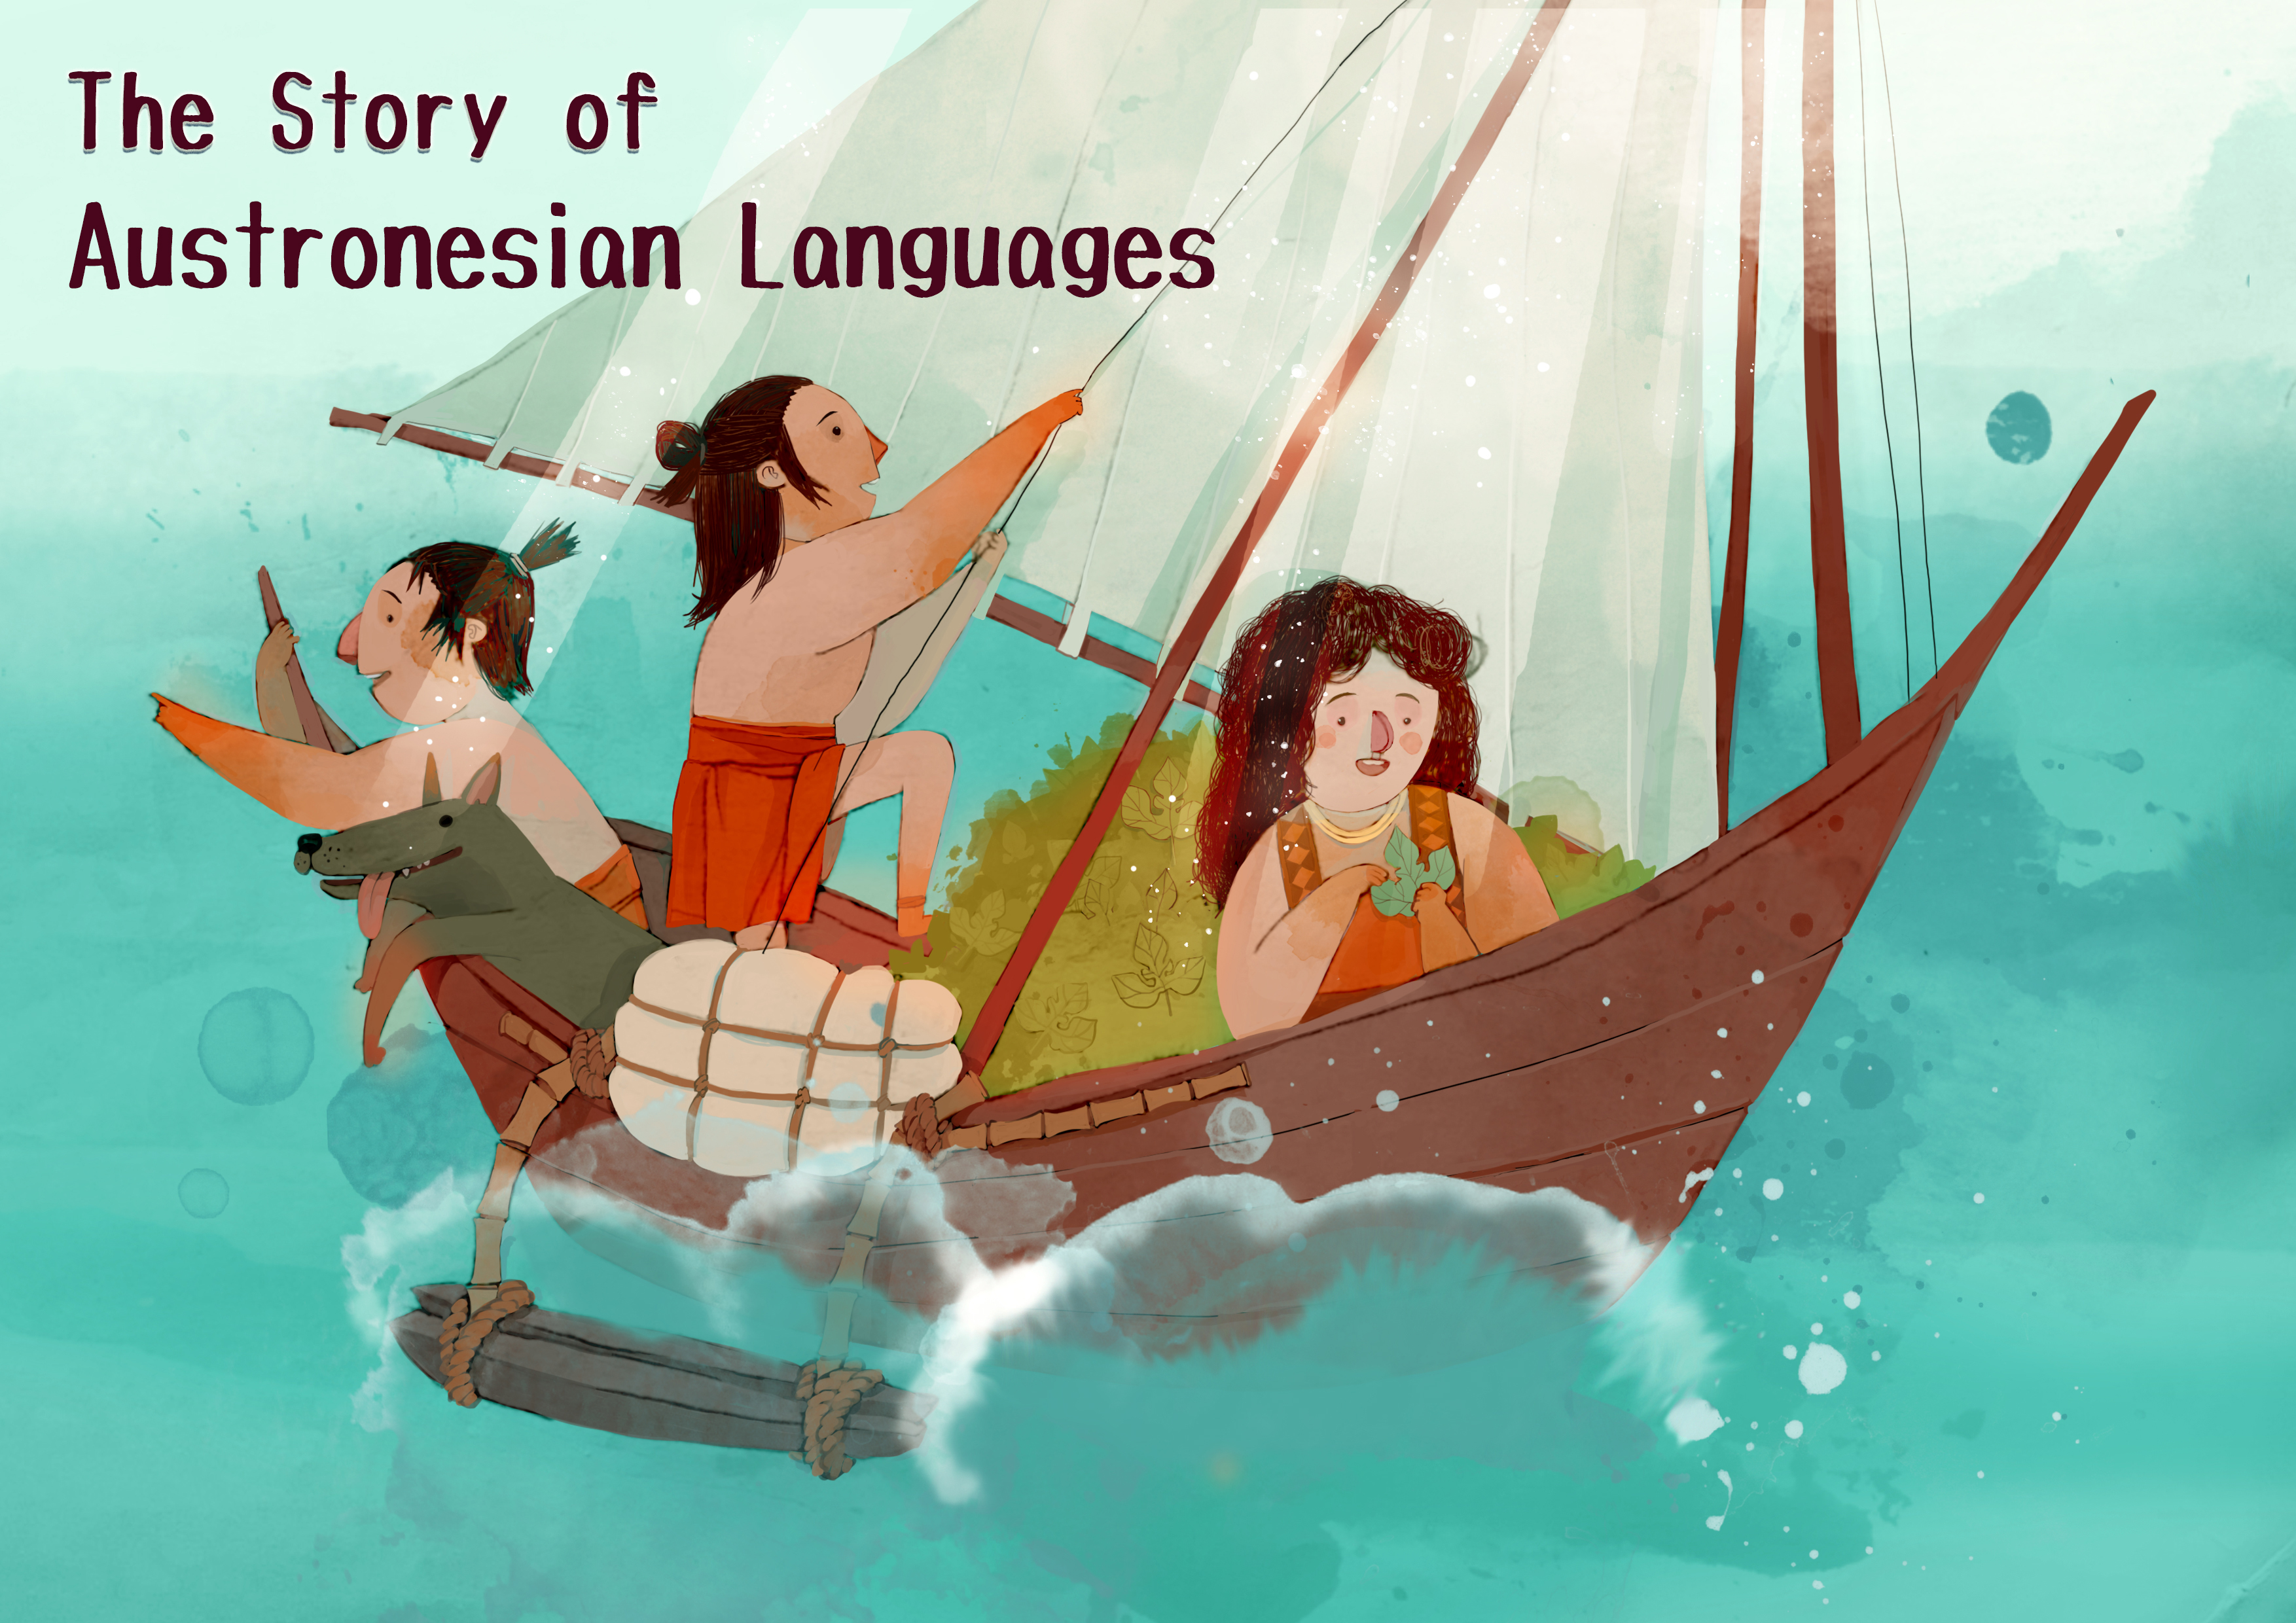 The Story of Austronesian Languages